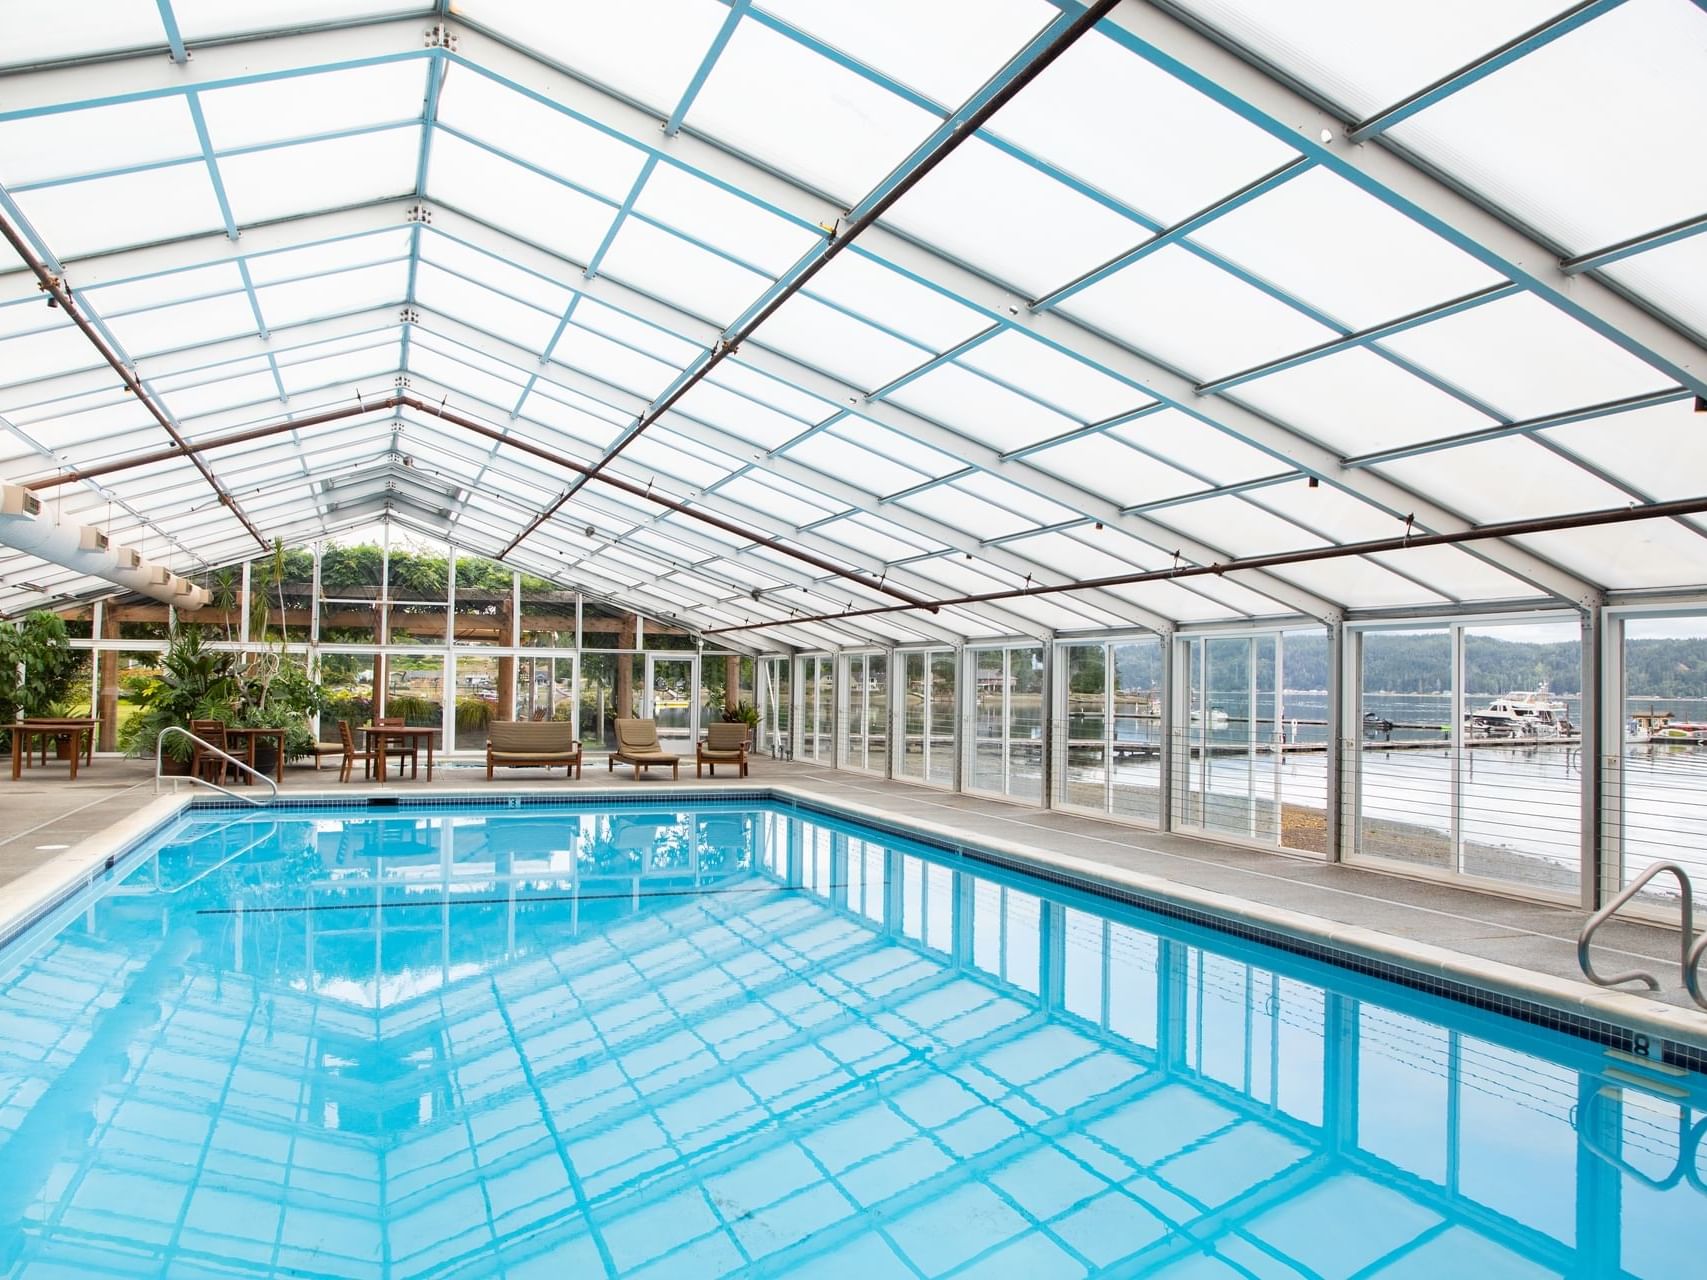 Indoor swimming pool with loungers overlooking the lake at Alderbrook Resort & Spa